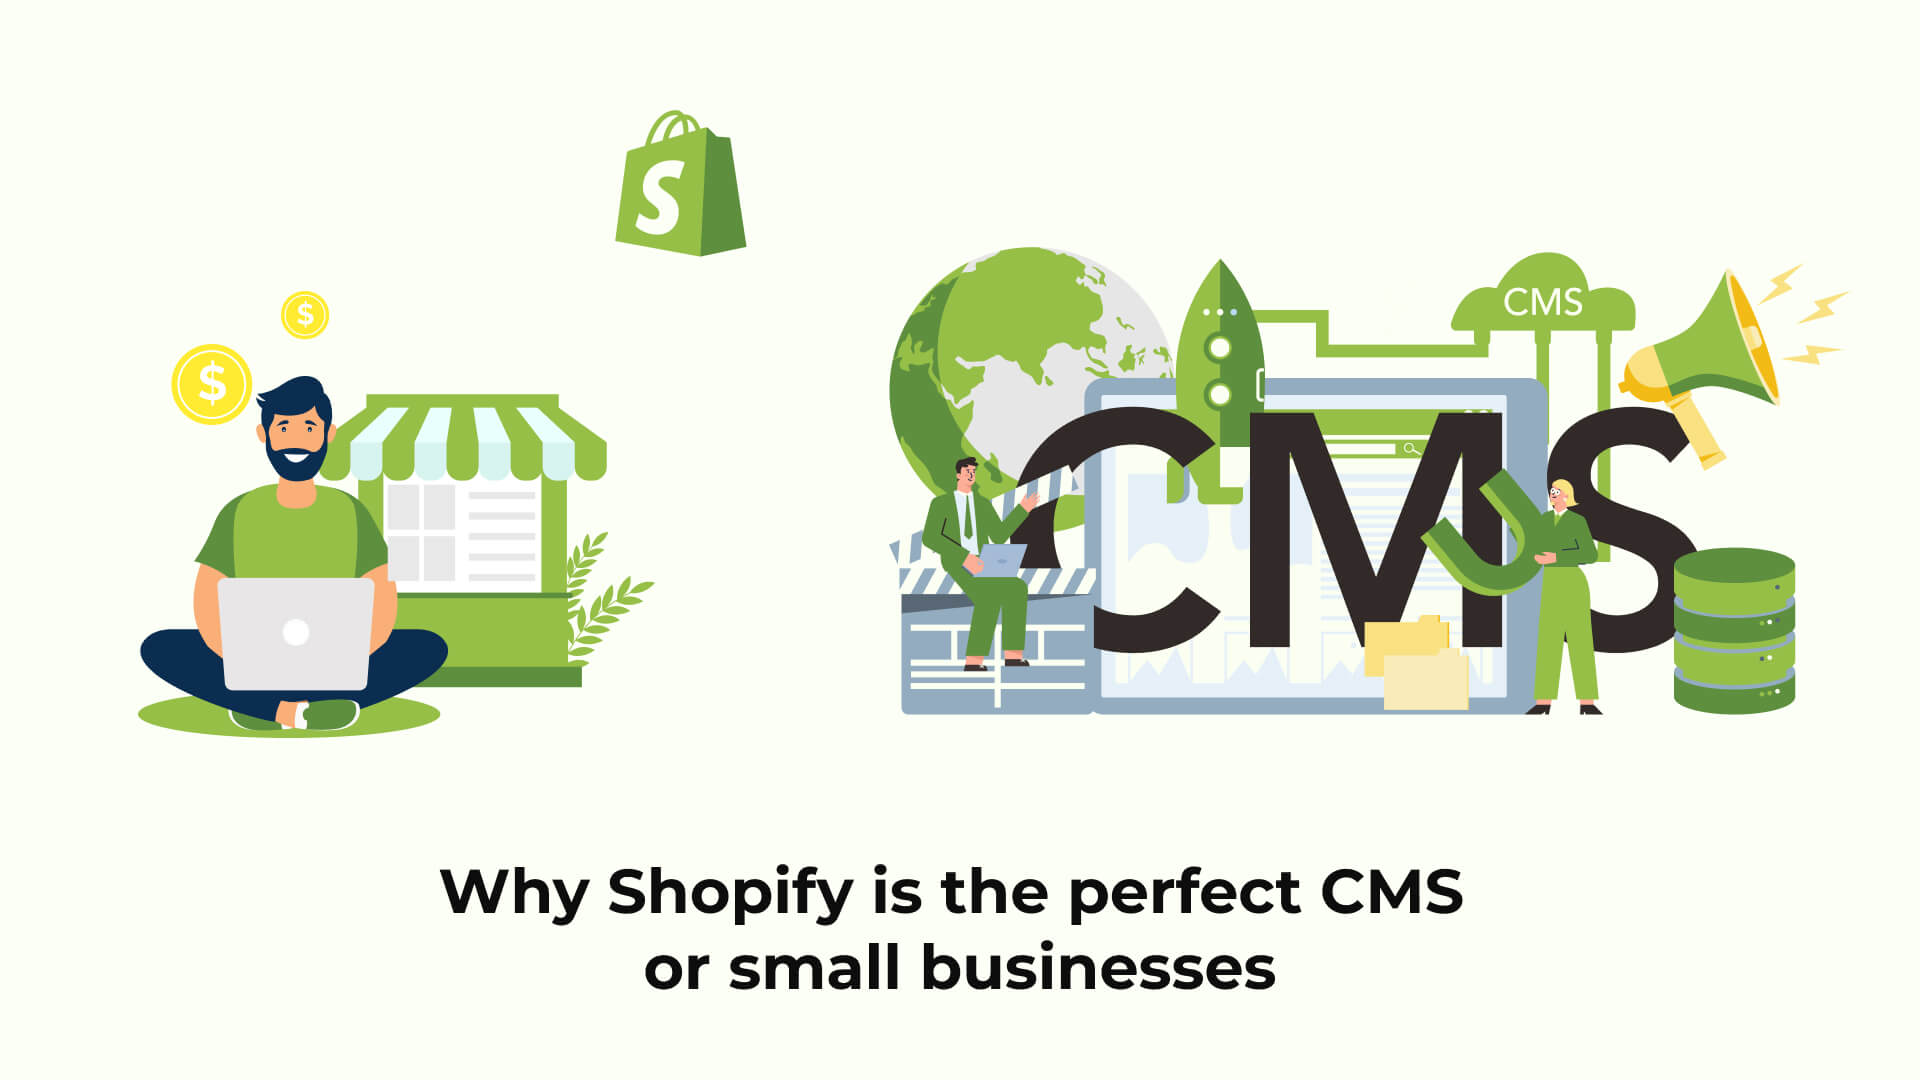 Why Shopify is the perfect CMS for small businesses